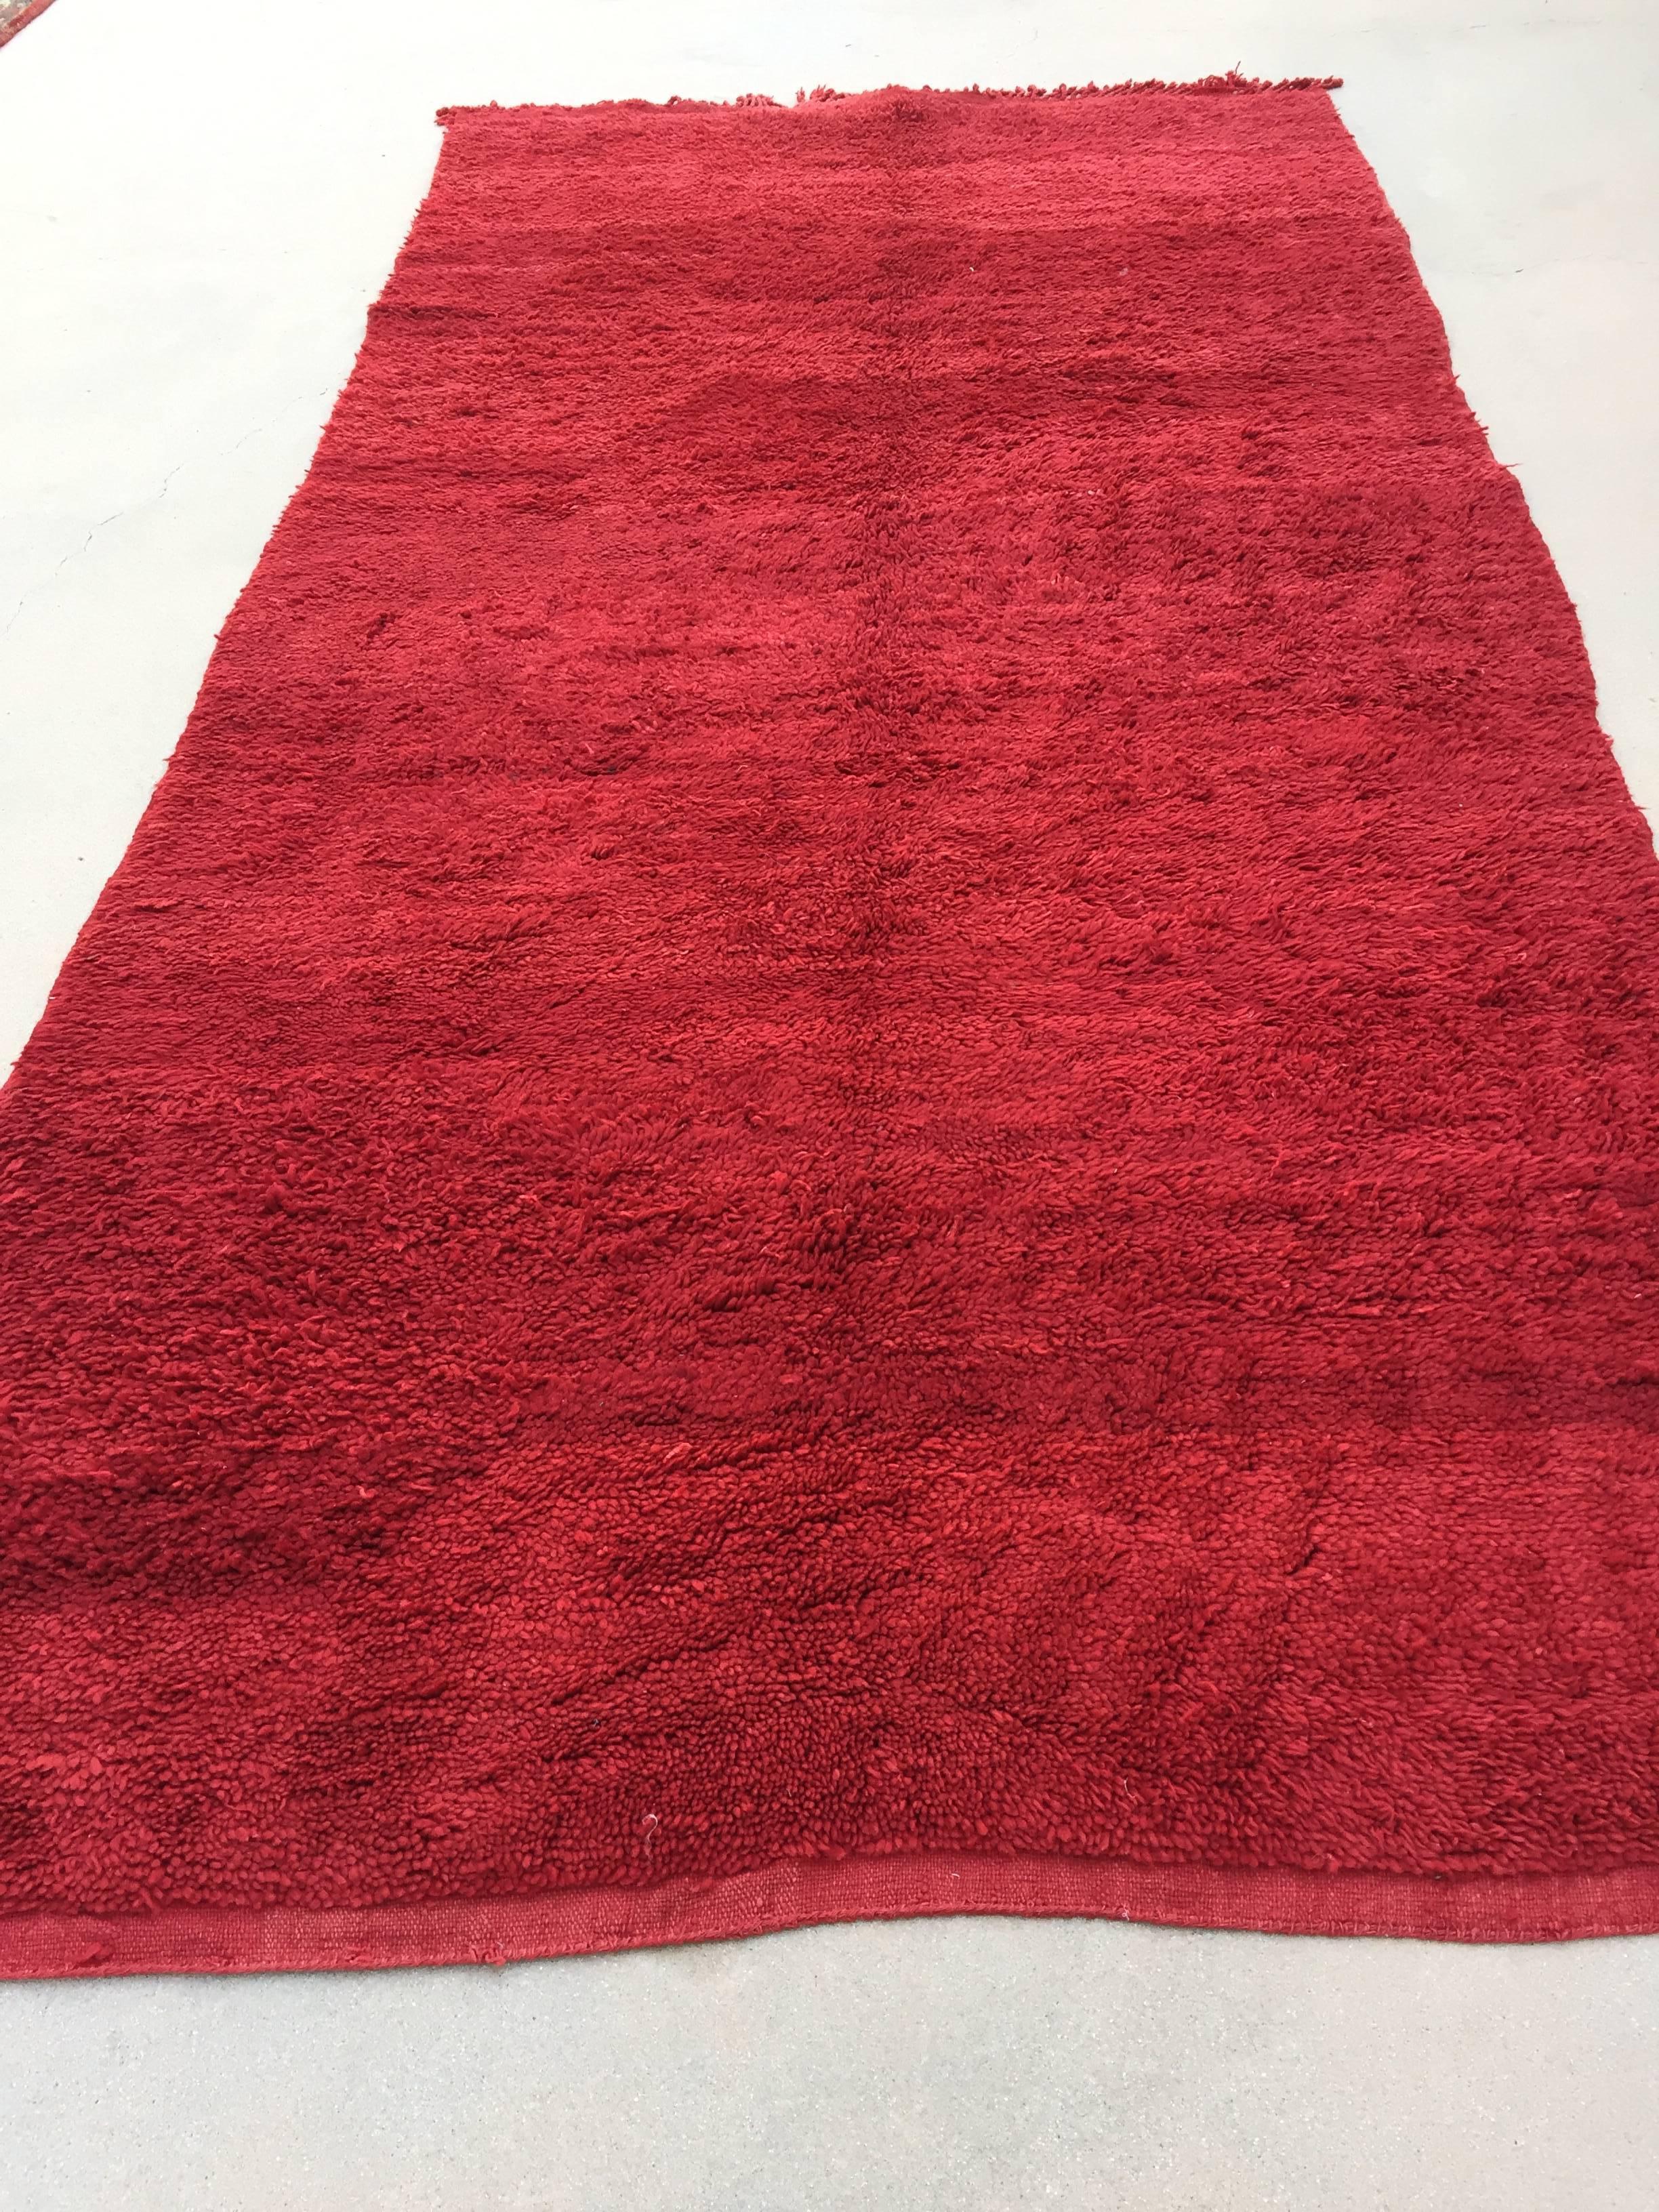 1960s authentic vintage tribal Moroccan Berber rug from the Middle Atlas mountains.
Monochromatic red rug with variations in color intensity typical for this tribe.
This is a good example with high quality handwoven wool.
Soft and shaggy tribal